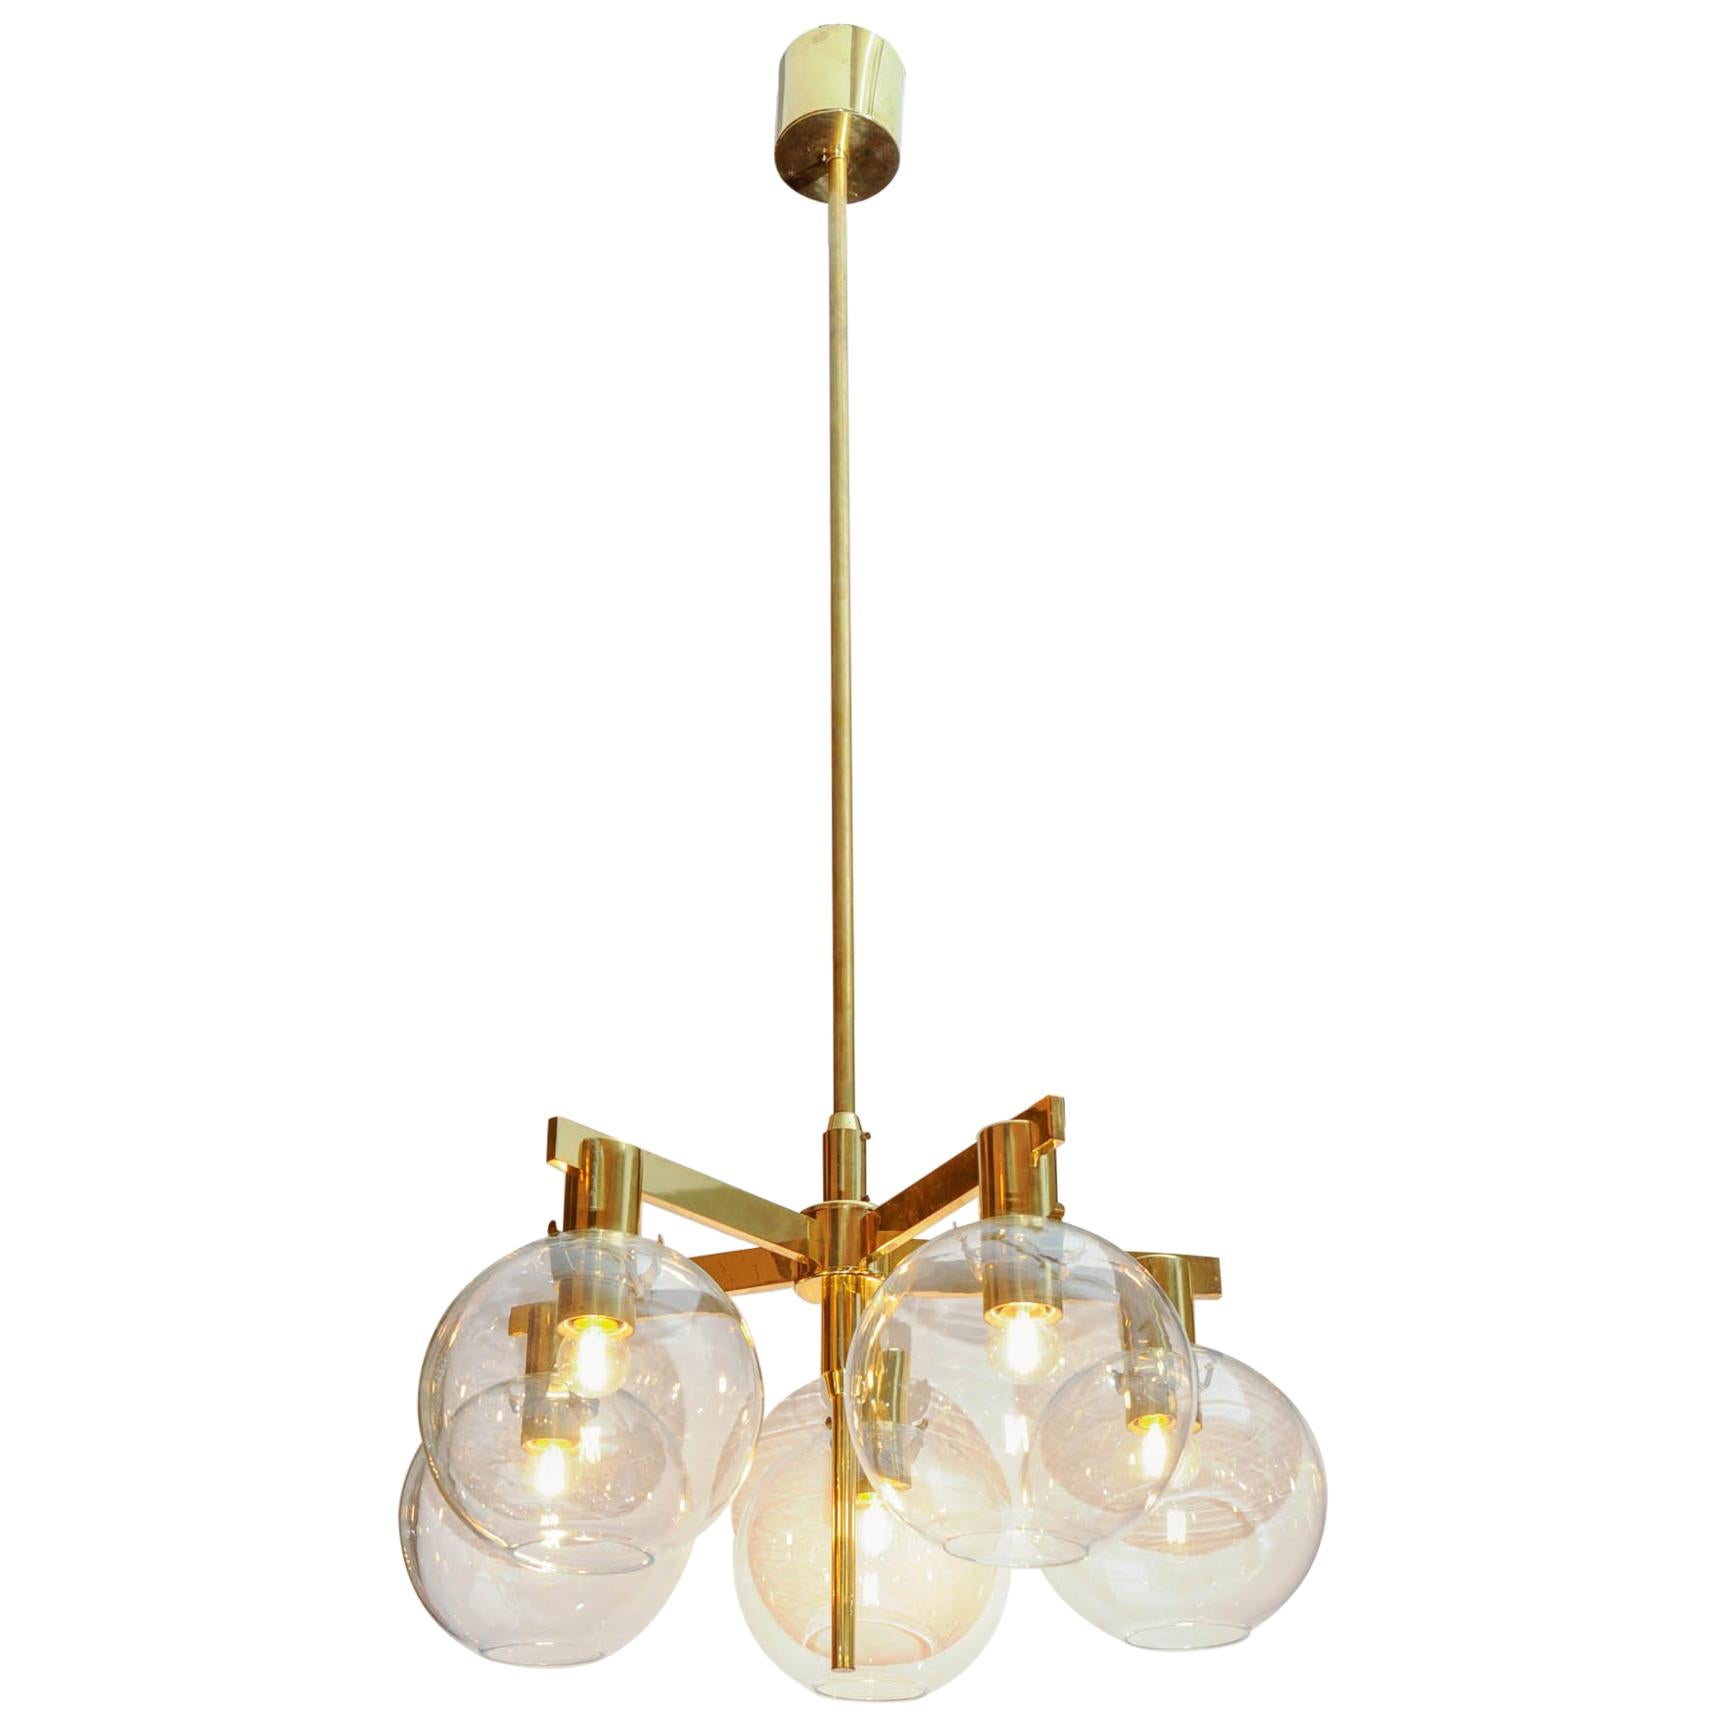 Pair of Brass and Glass Five Lights Chandeliers by Hans Agne Jakobsson For Sale